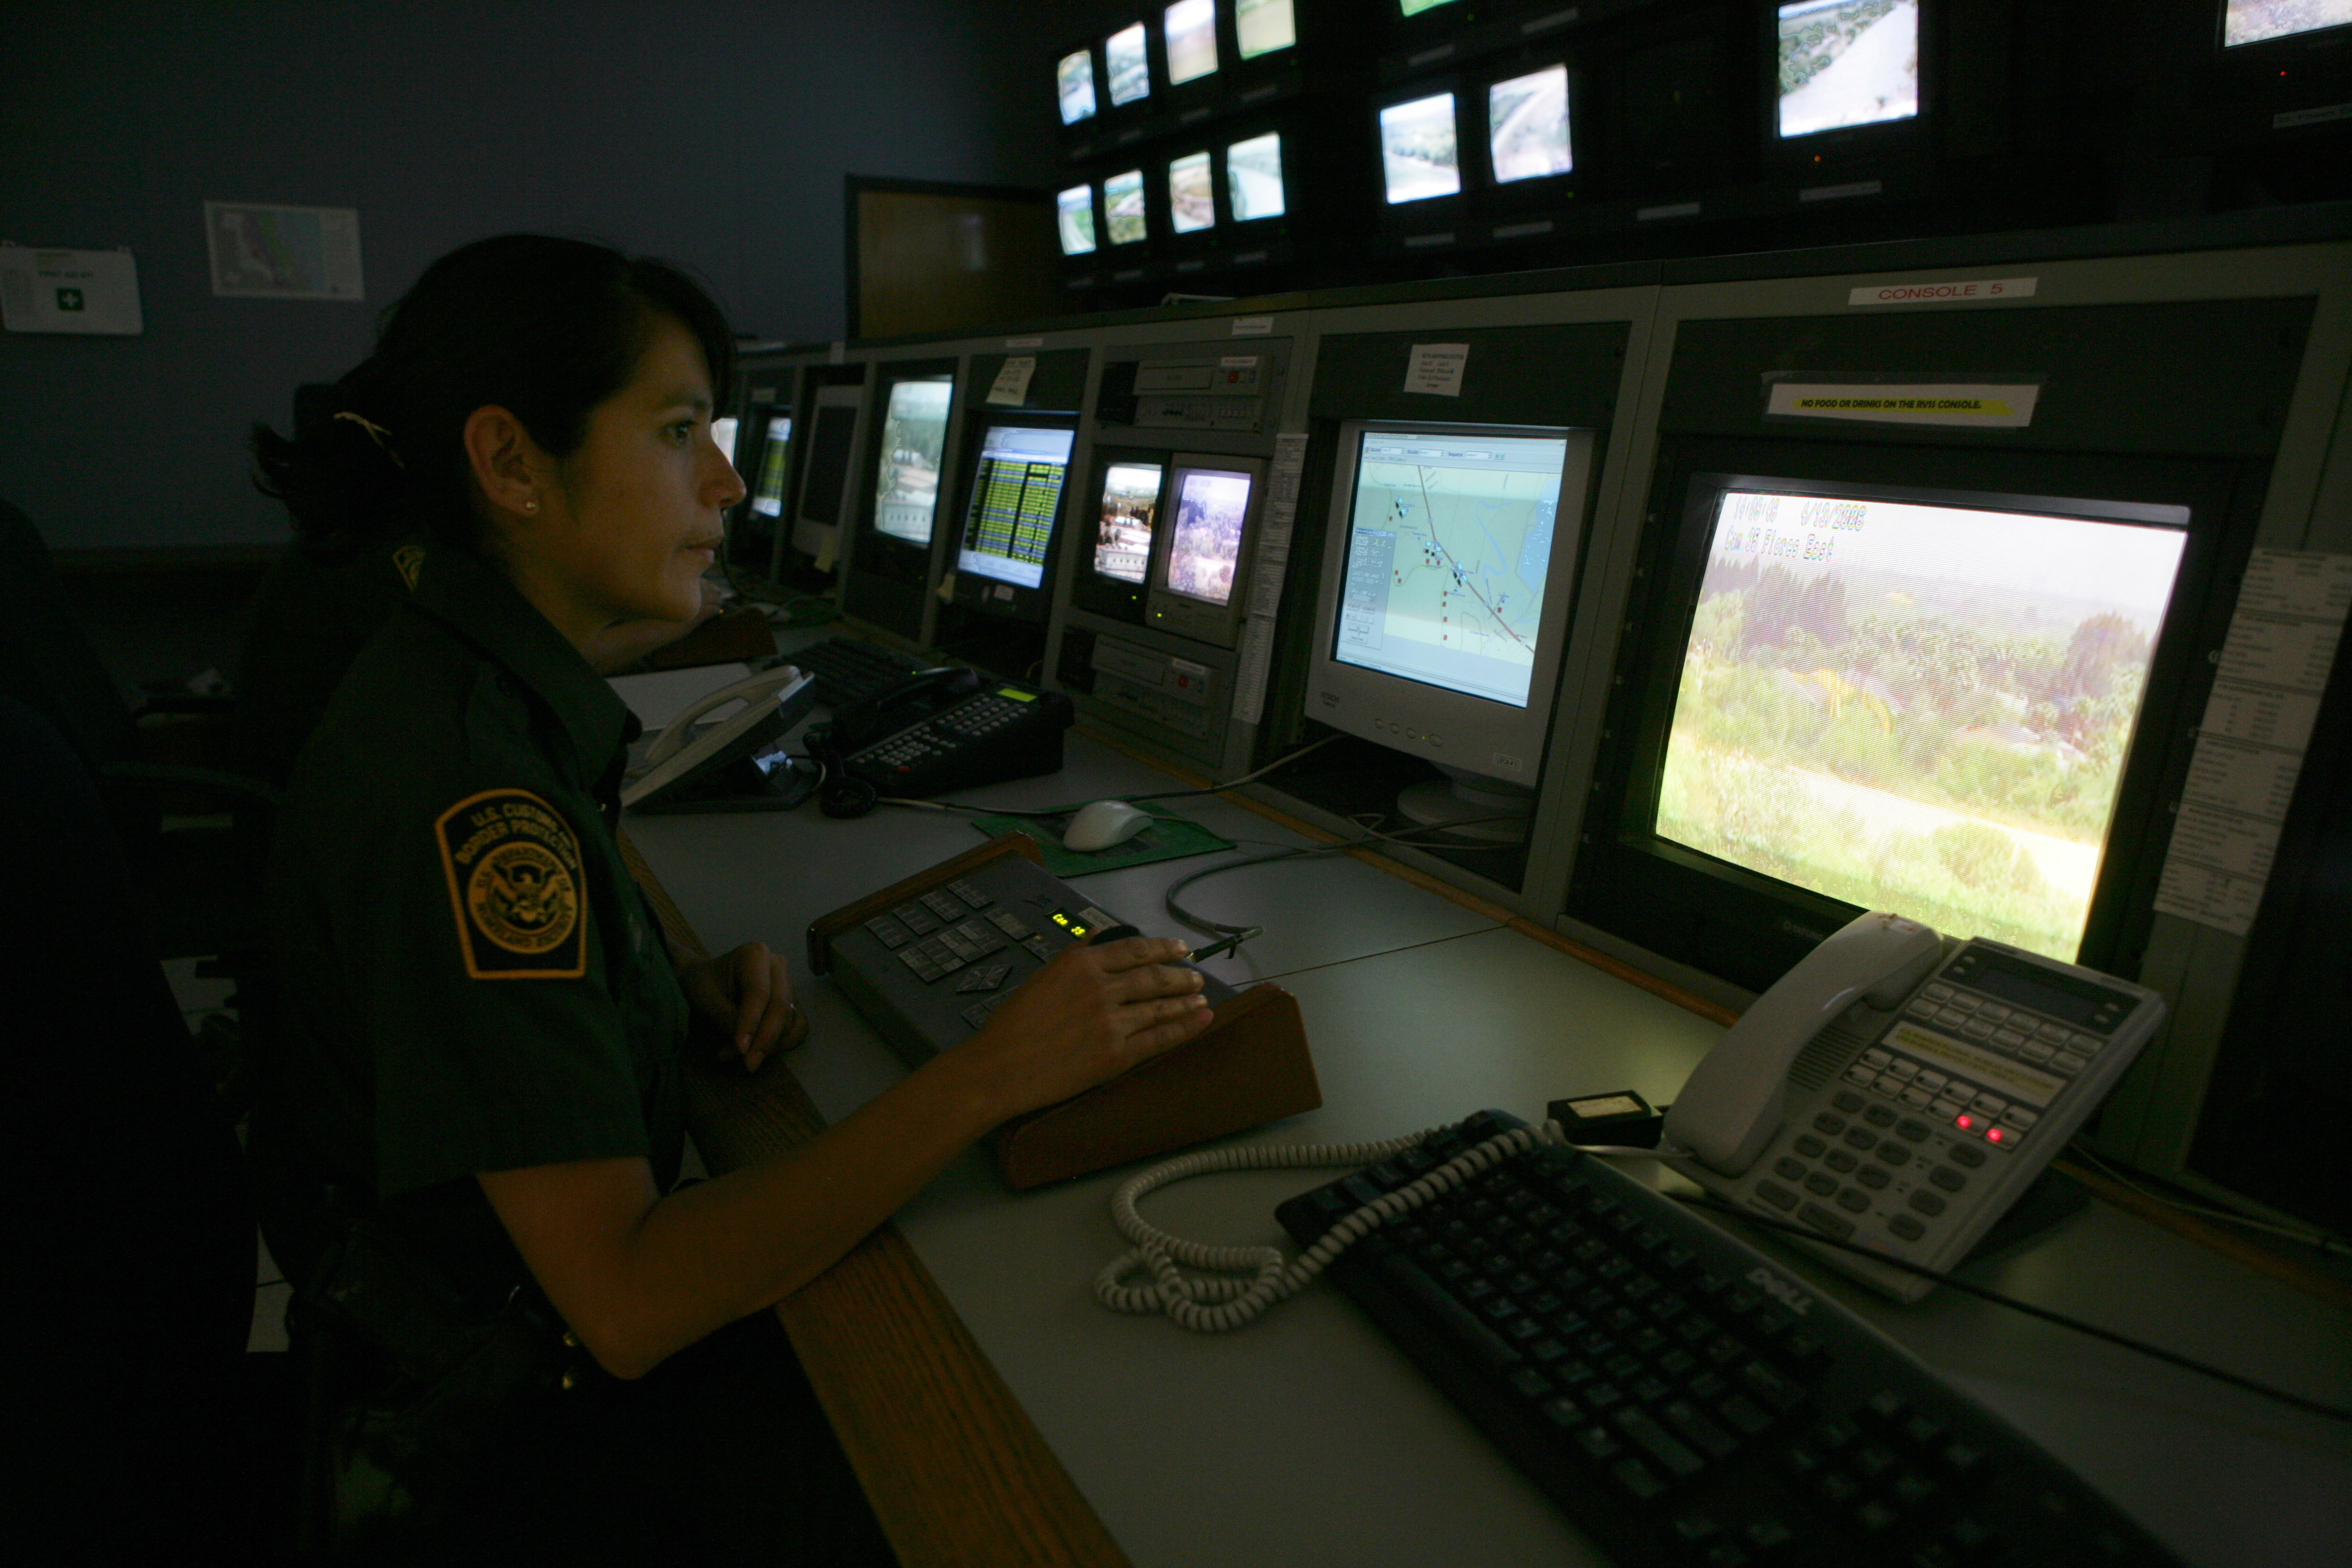 A U.S. Border Patrol Agent operates remote camera systems located along the U.S. border trying to locate illegals immigrants.